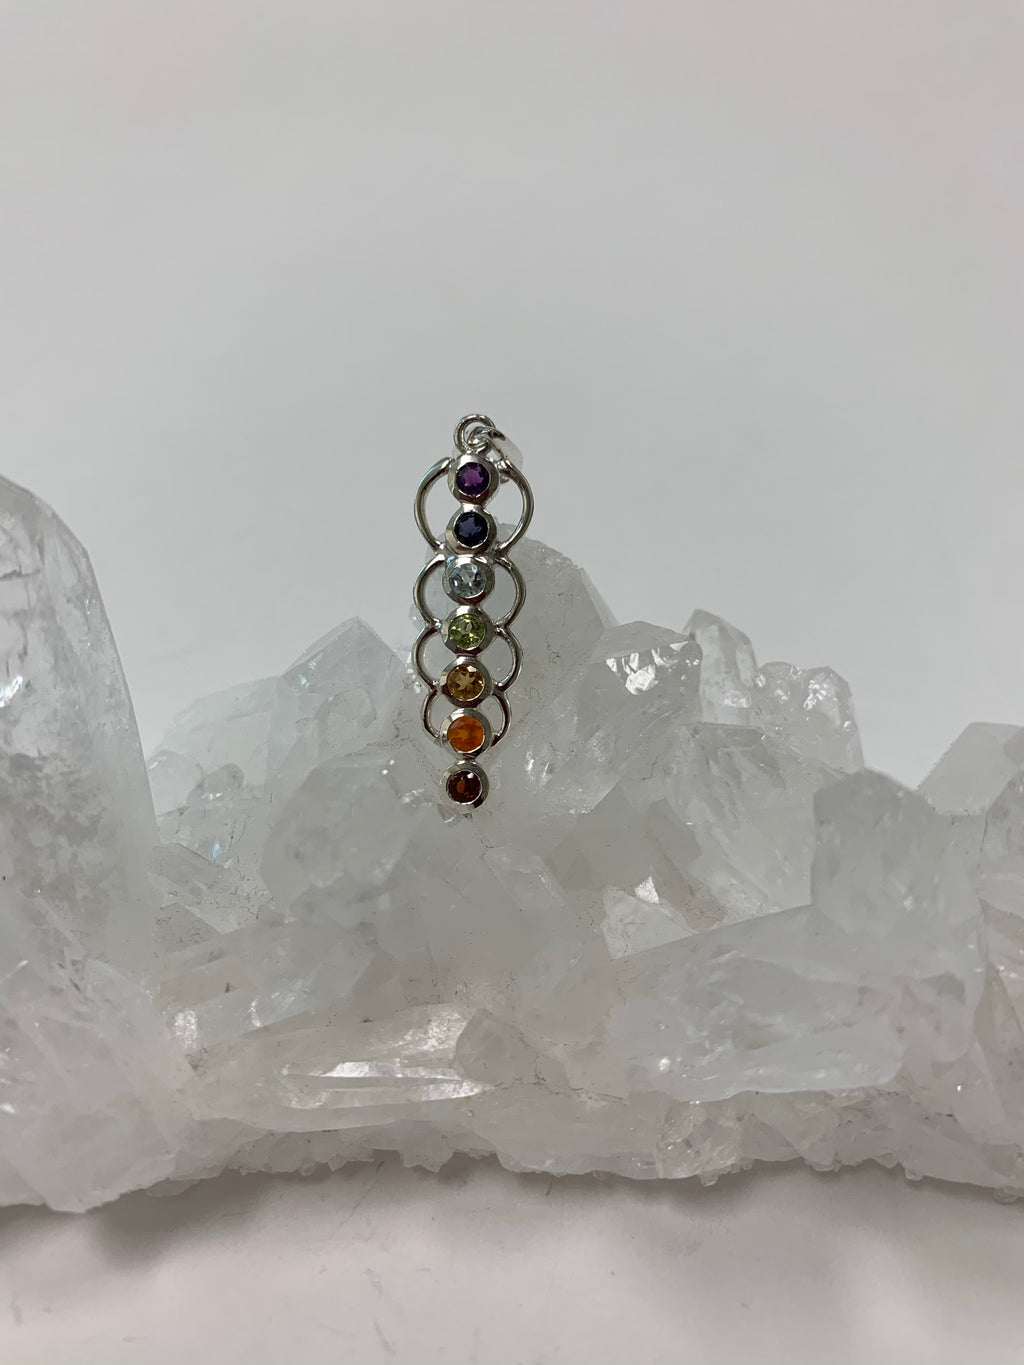 Chakra energy link pendant. Small faceted stones that represent each of the chakras: amethyst/crown, iolite/third eye, blue topaz/throat, peridot/heart, citrine/solar plexus, carnelian/sacral (or naval), garnet/root (or base). These stones, set in links or loops of sterling silver, two per loop or link, go straight down the middle. Pendant is approximately 1¾".